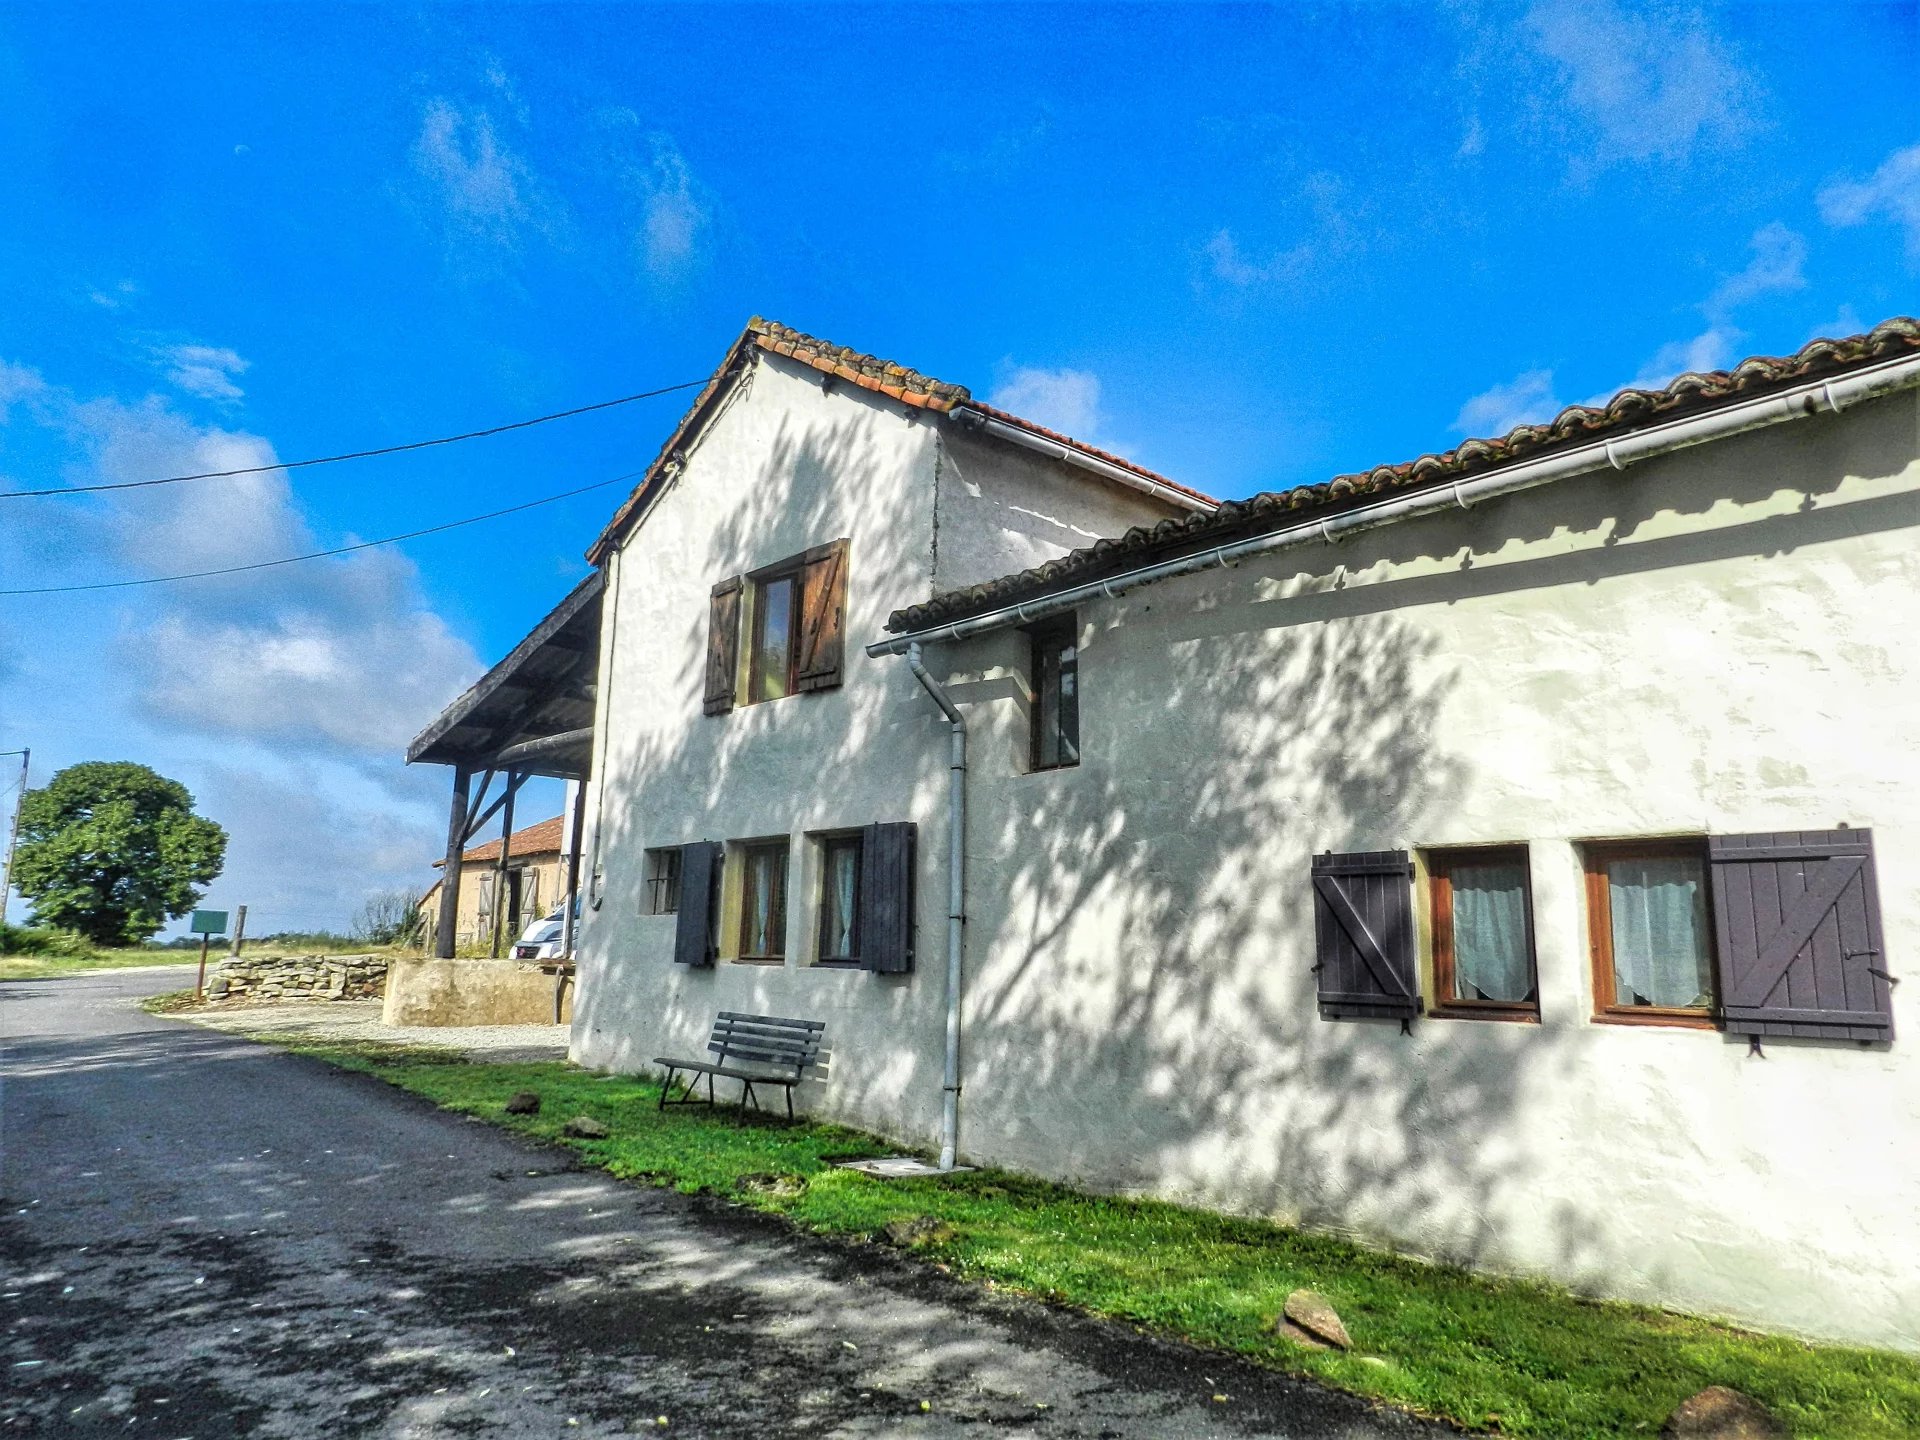 Two/three bedroom two bathroom property Countryside living close to popular Vienne village location.